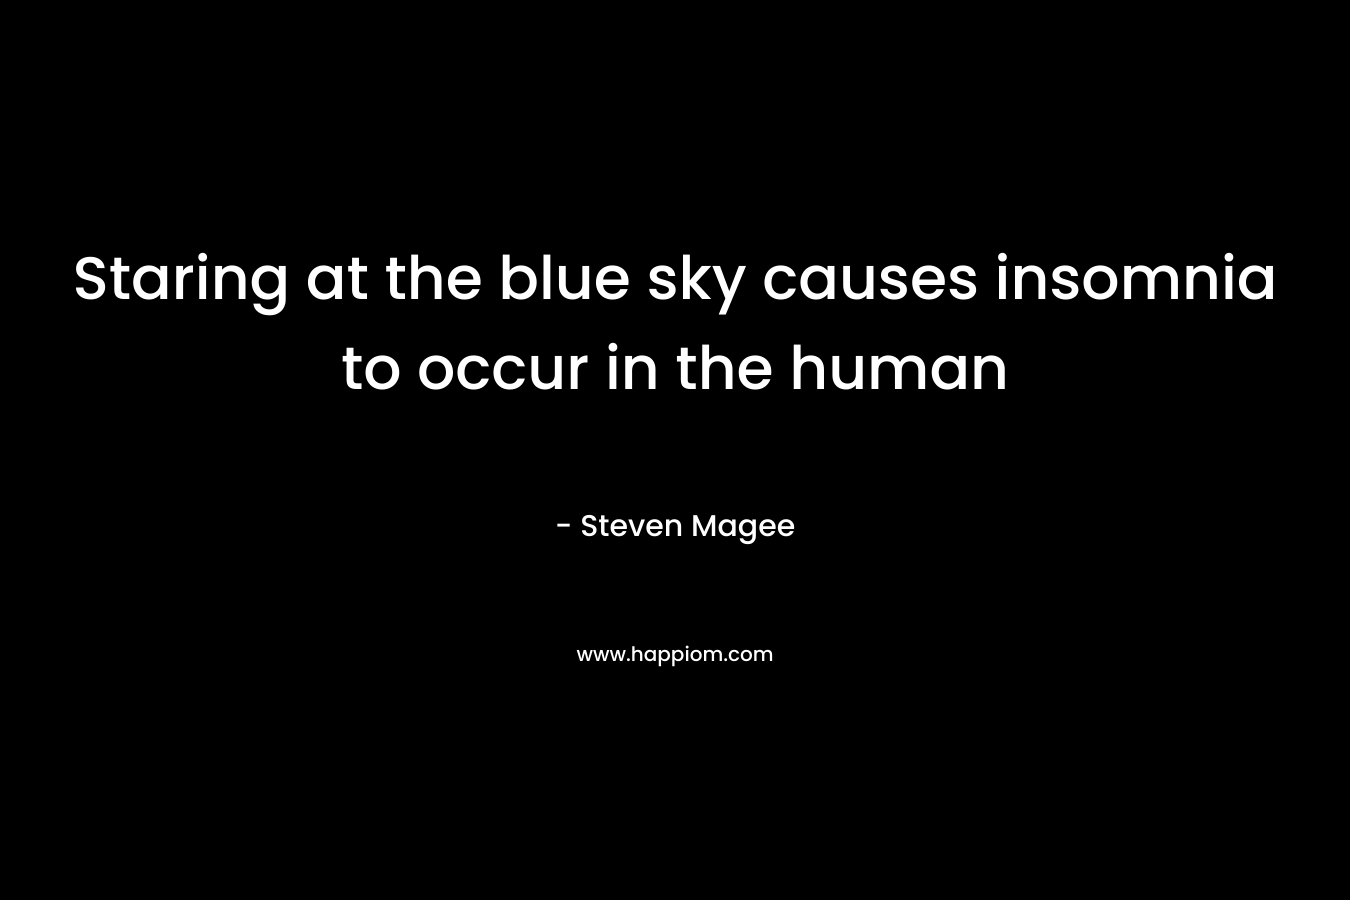 Staring at the blue sky causes insomnia to occur in the human